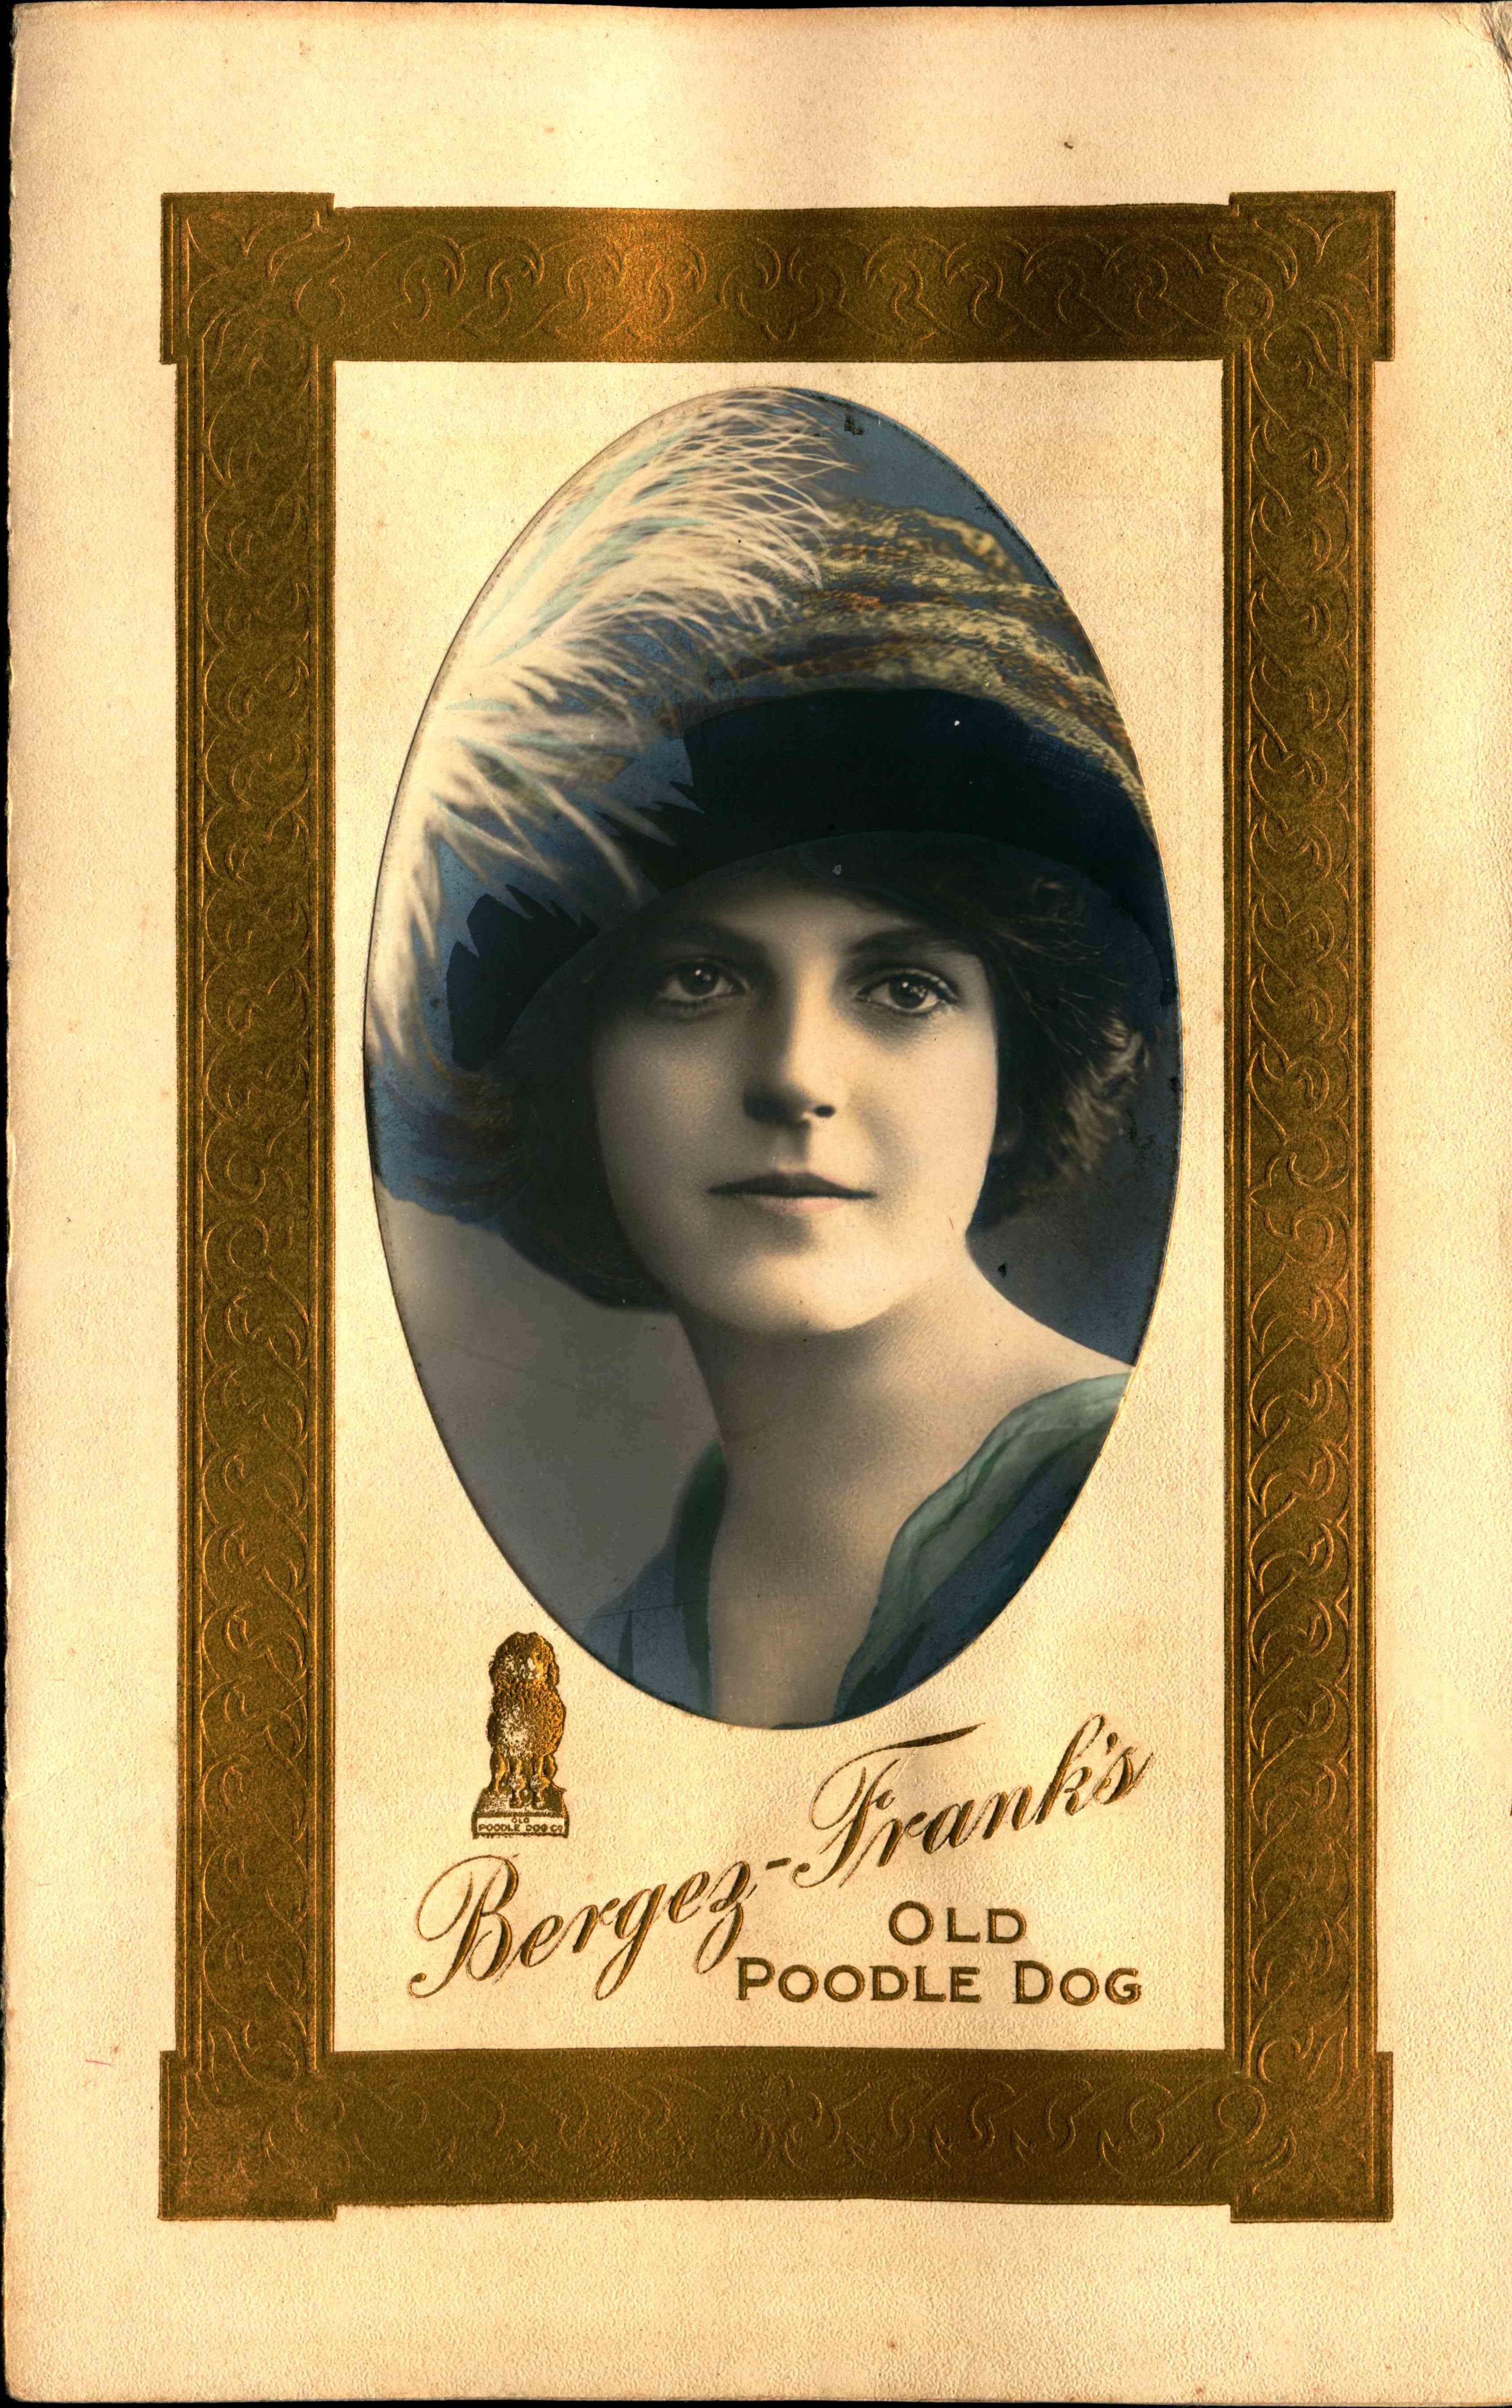 A picture of a young lady wear a hat